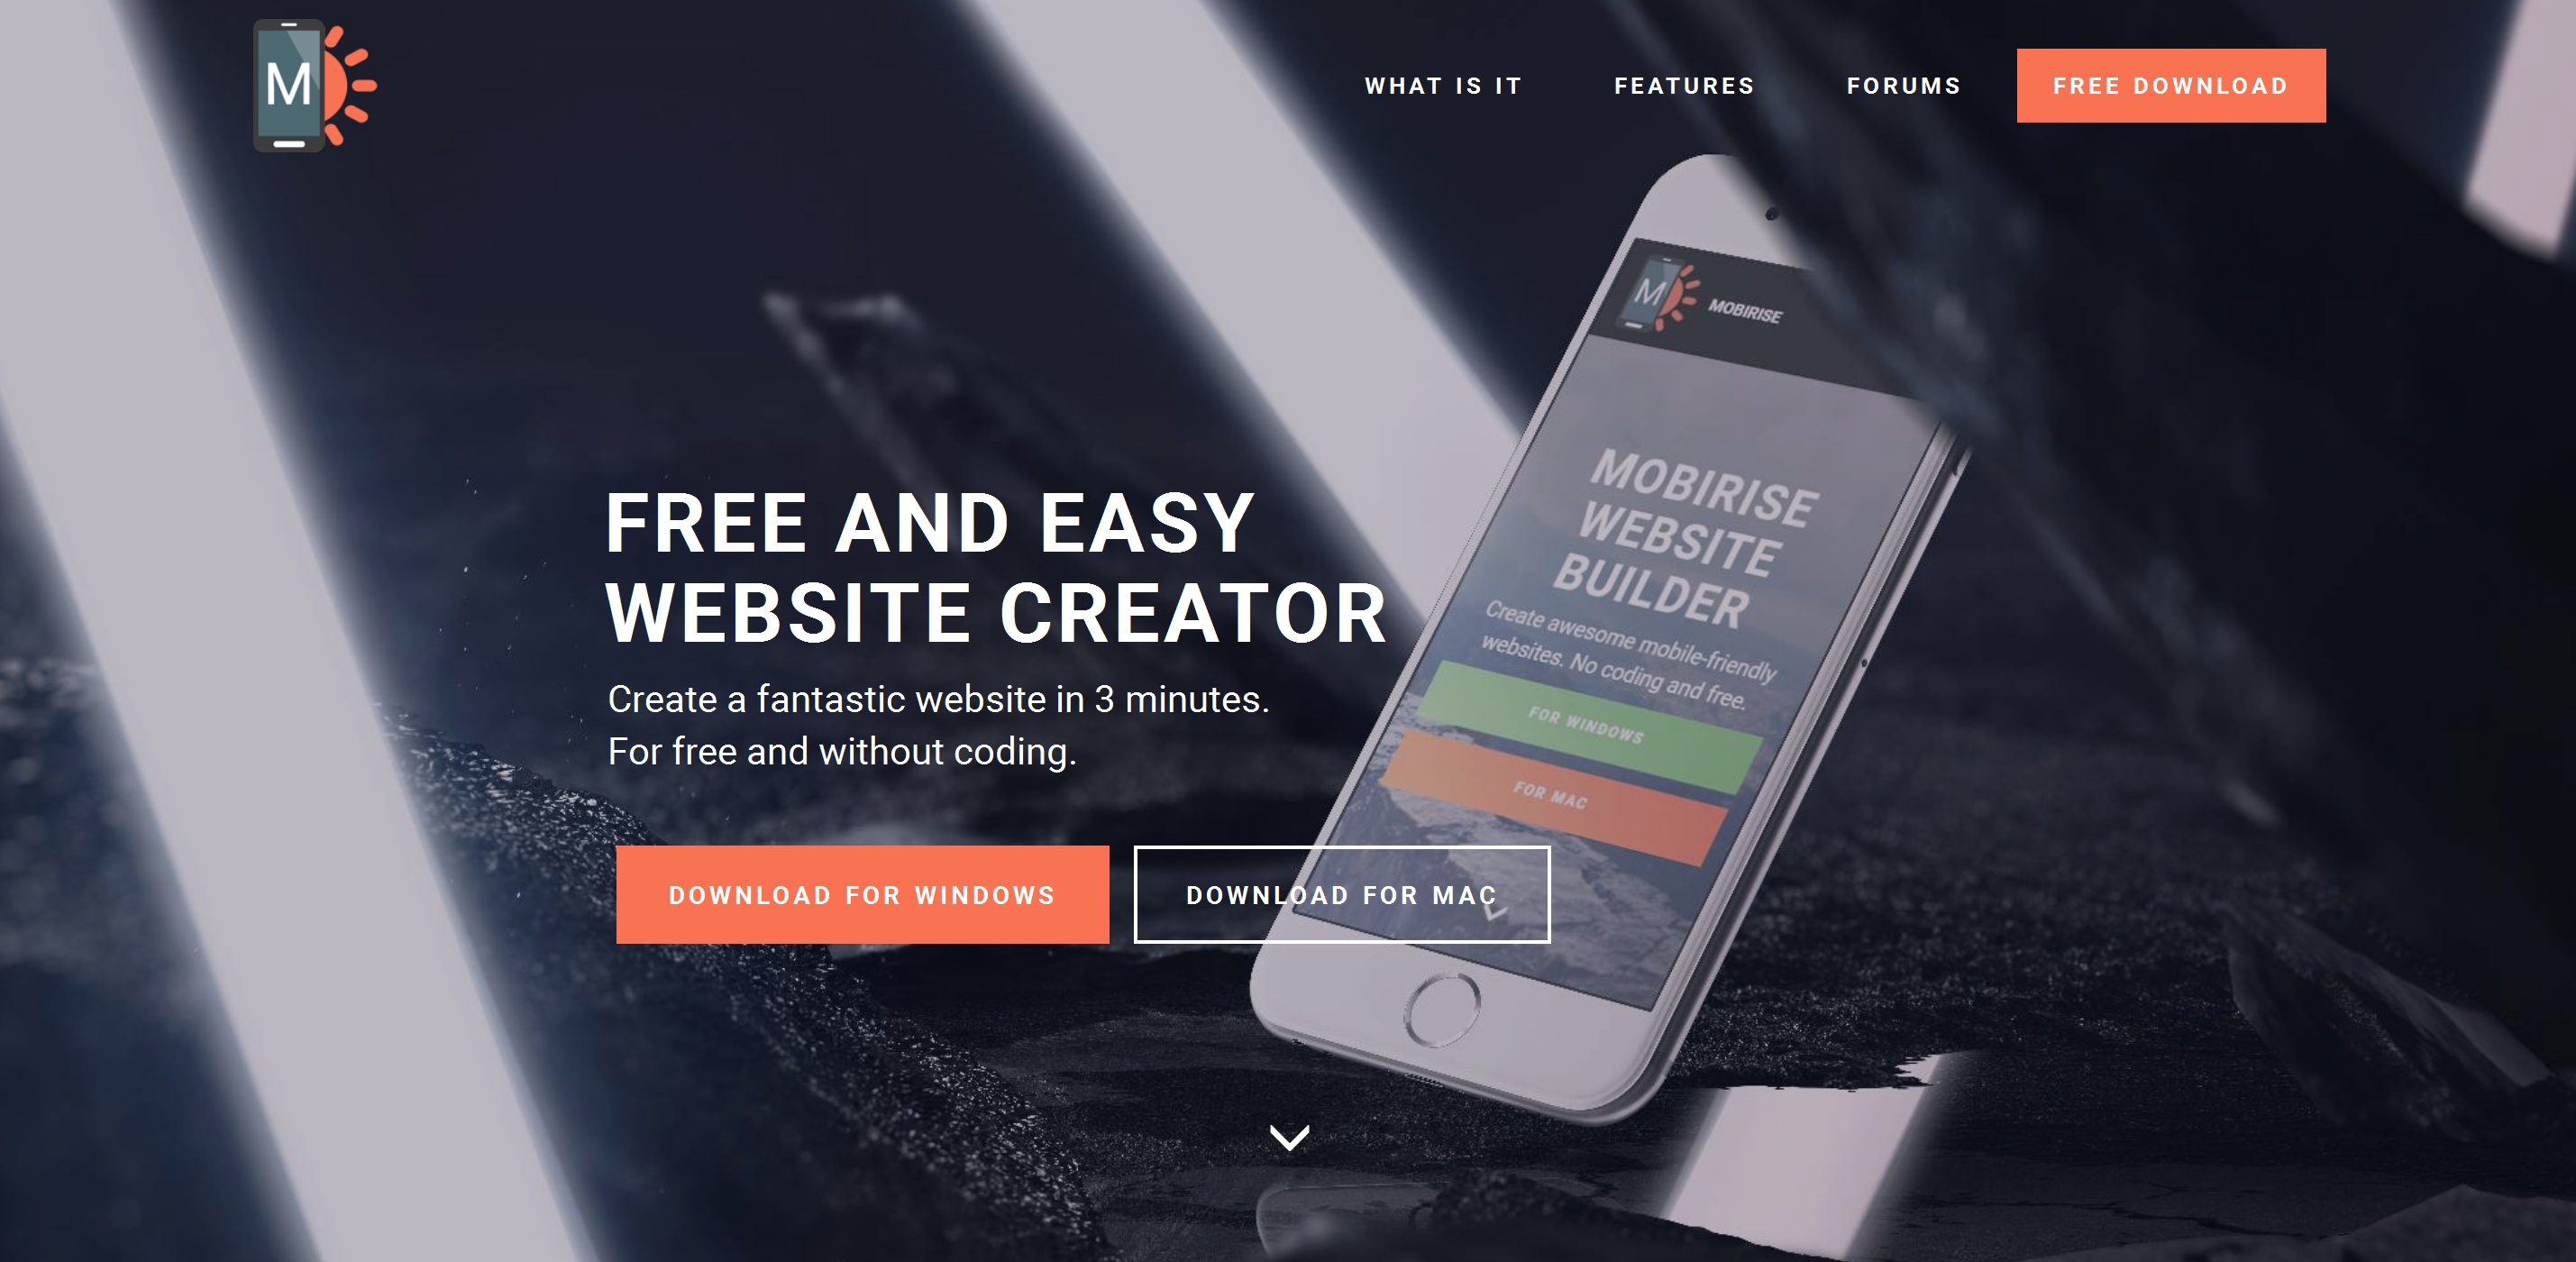 Free HTML5 Web Page  Creator Review